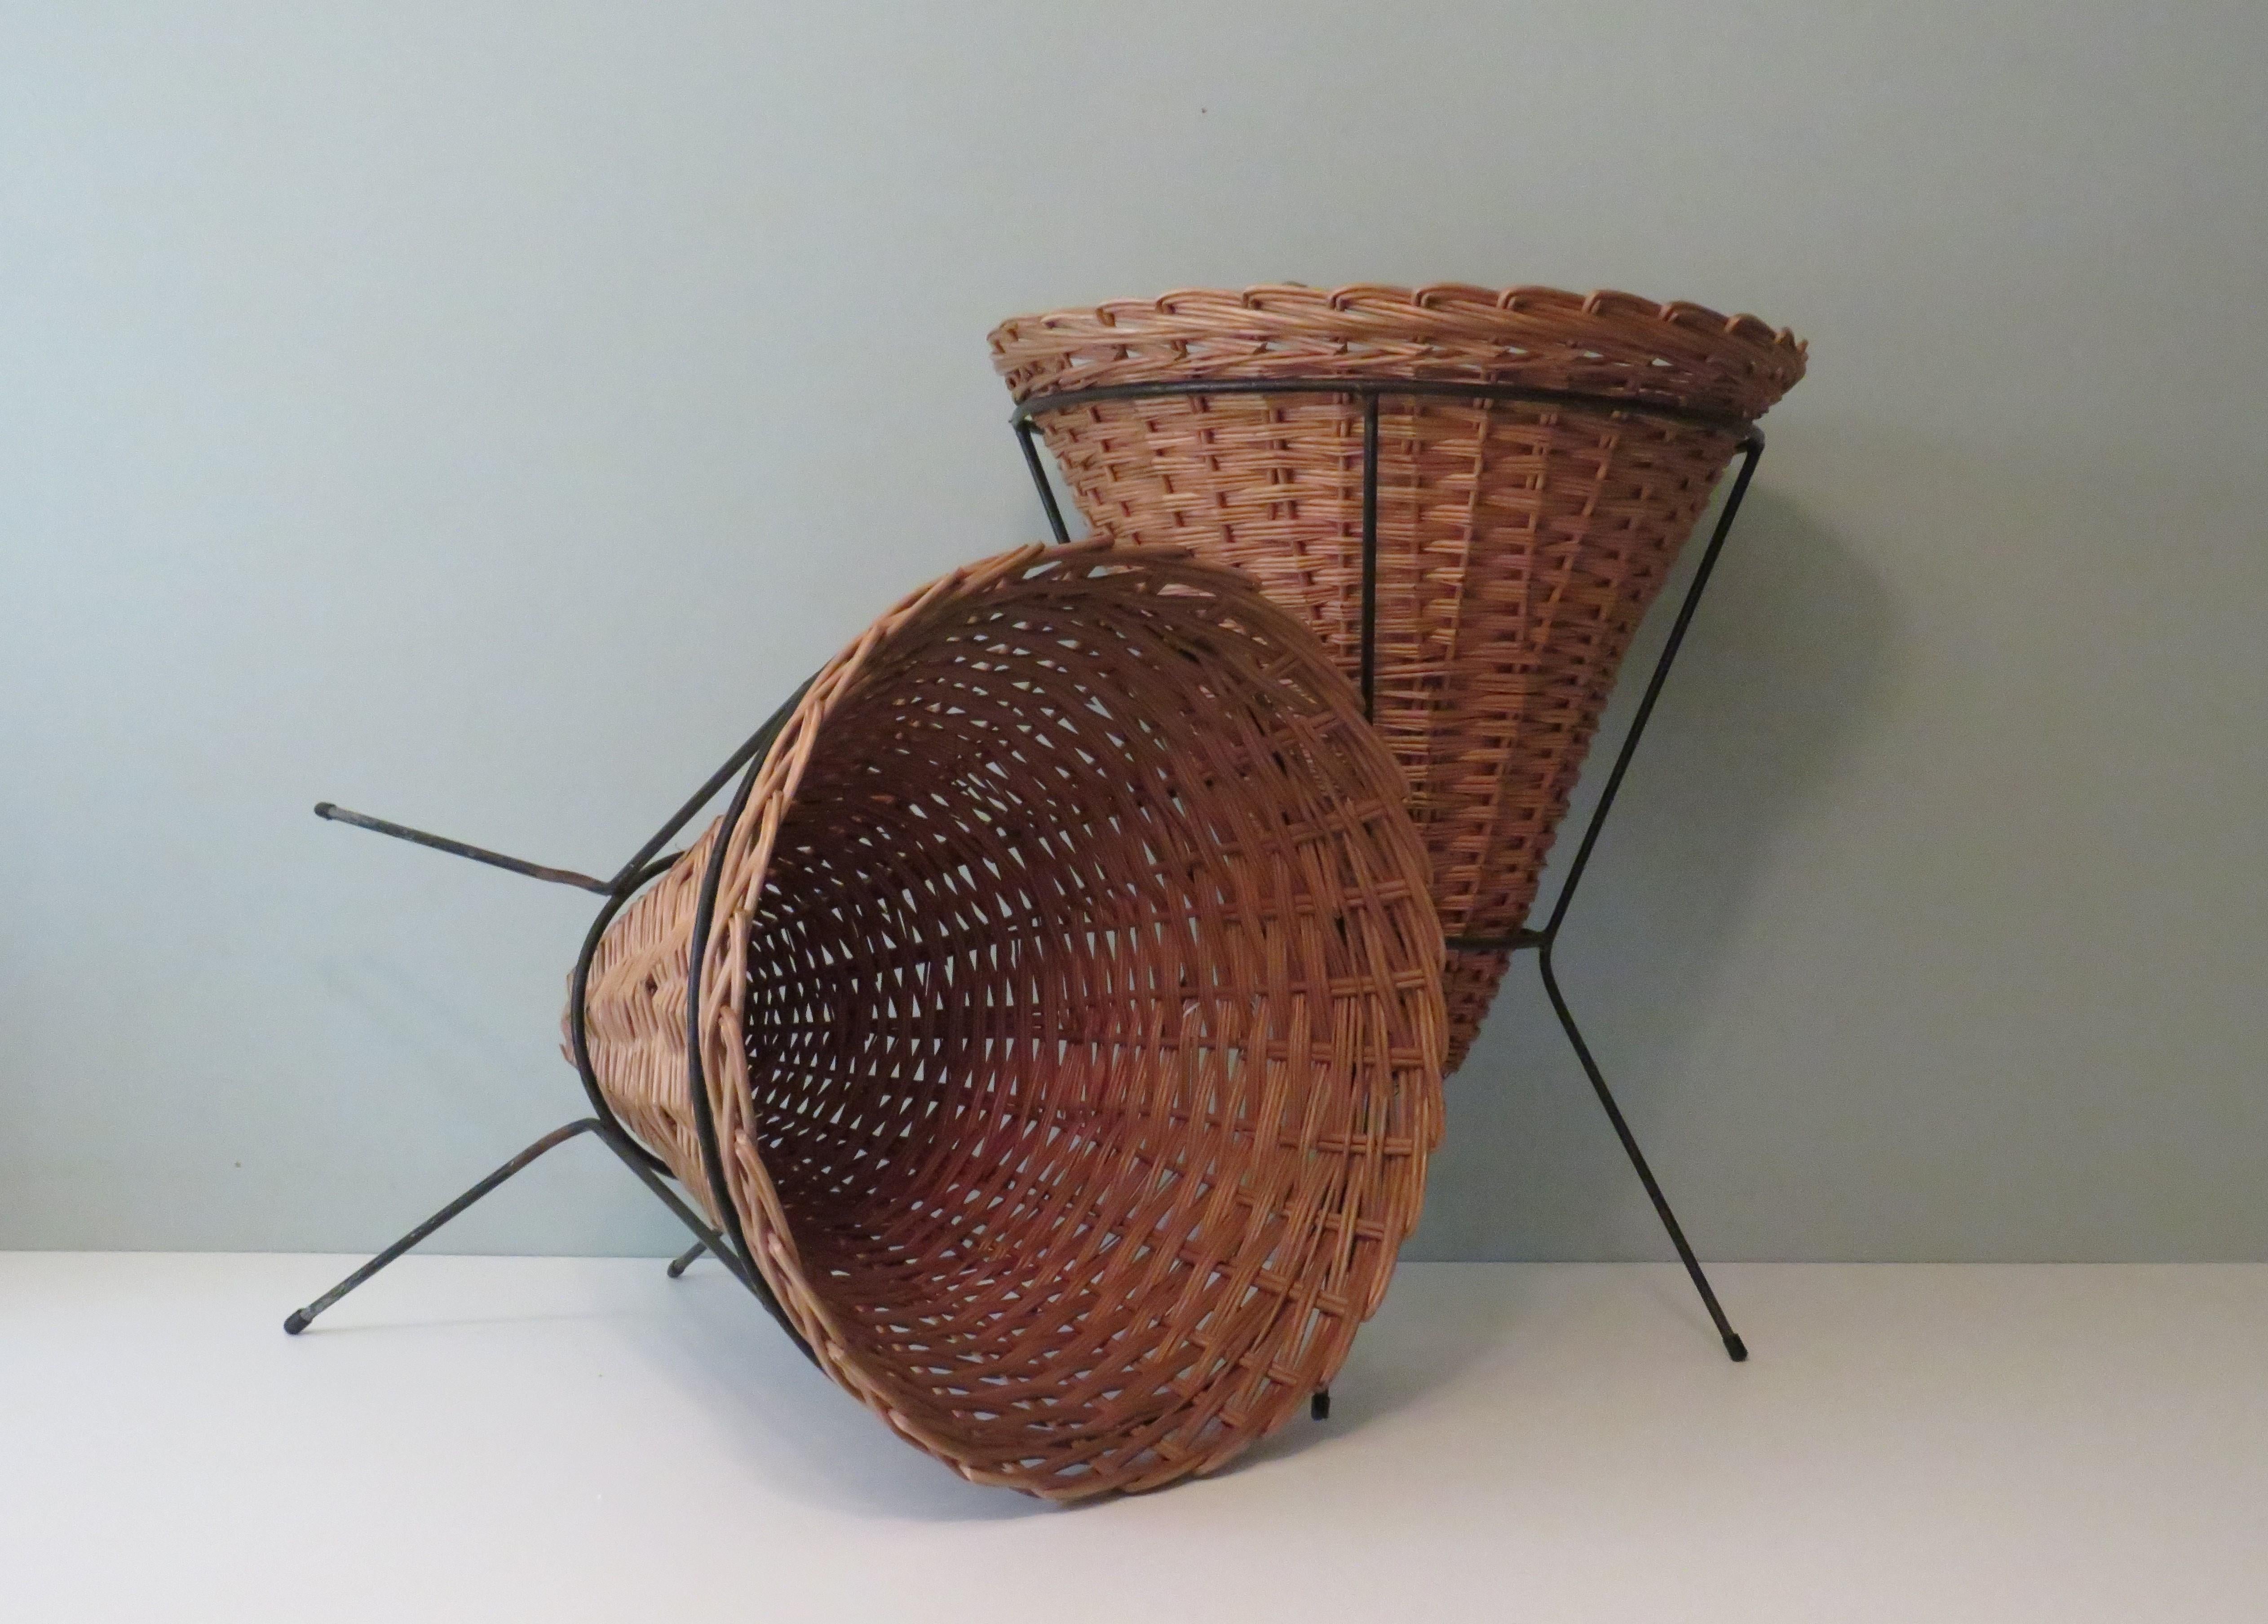 The display baskets were manufactured by Rohé & Noordwolde around 1960 in the Netherlands after a design by Dirk Van Sliedrecht. They are removable from the black metal frames.
They have a diameter of 53 cm and a height of 65 cm and are stackable.